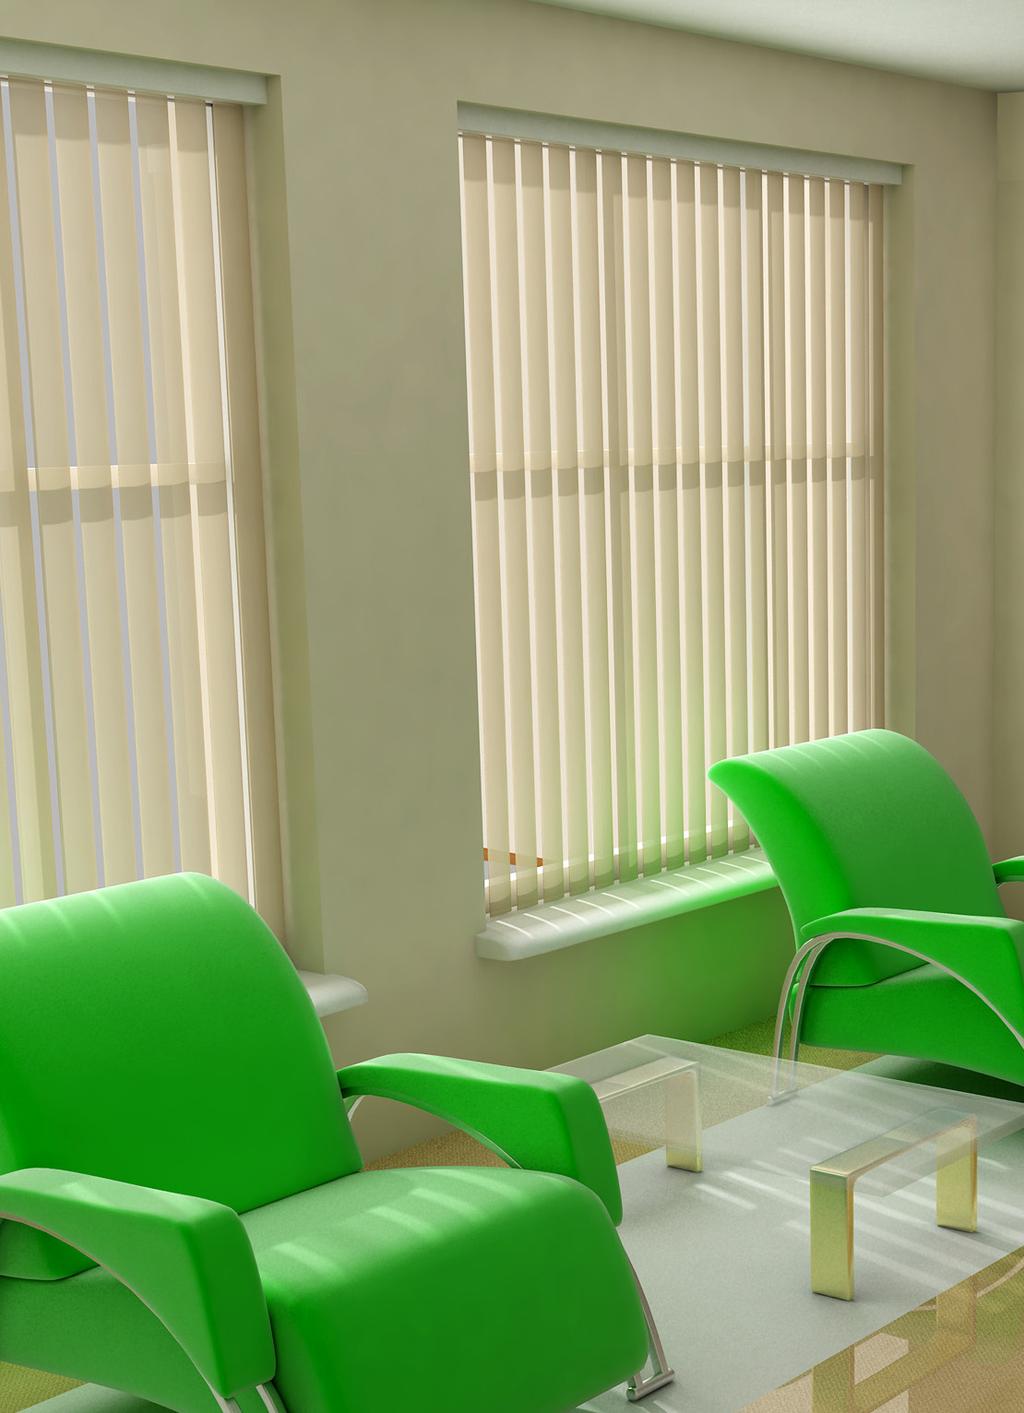 PVC VERTICAL BLINDS (PV) Easily shortened to exact length; dust and fade